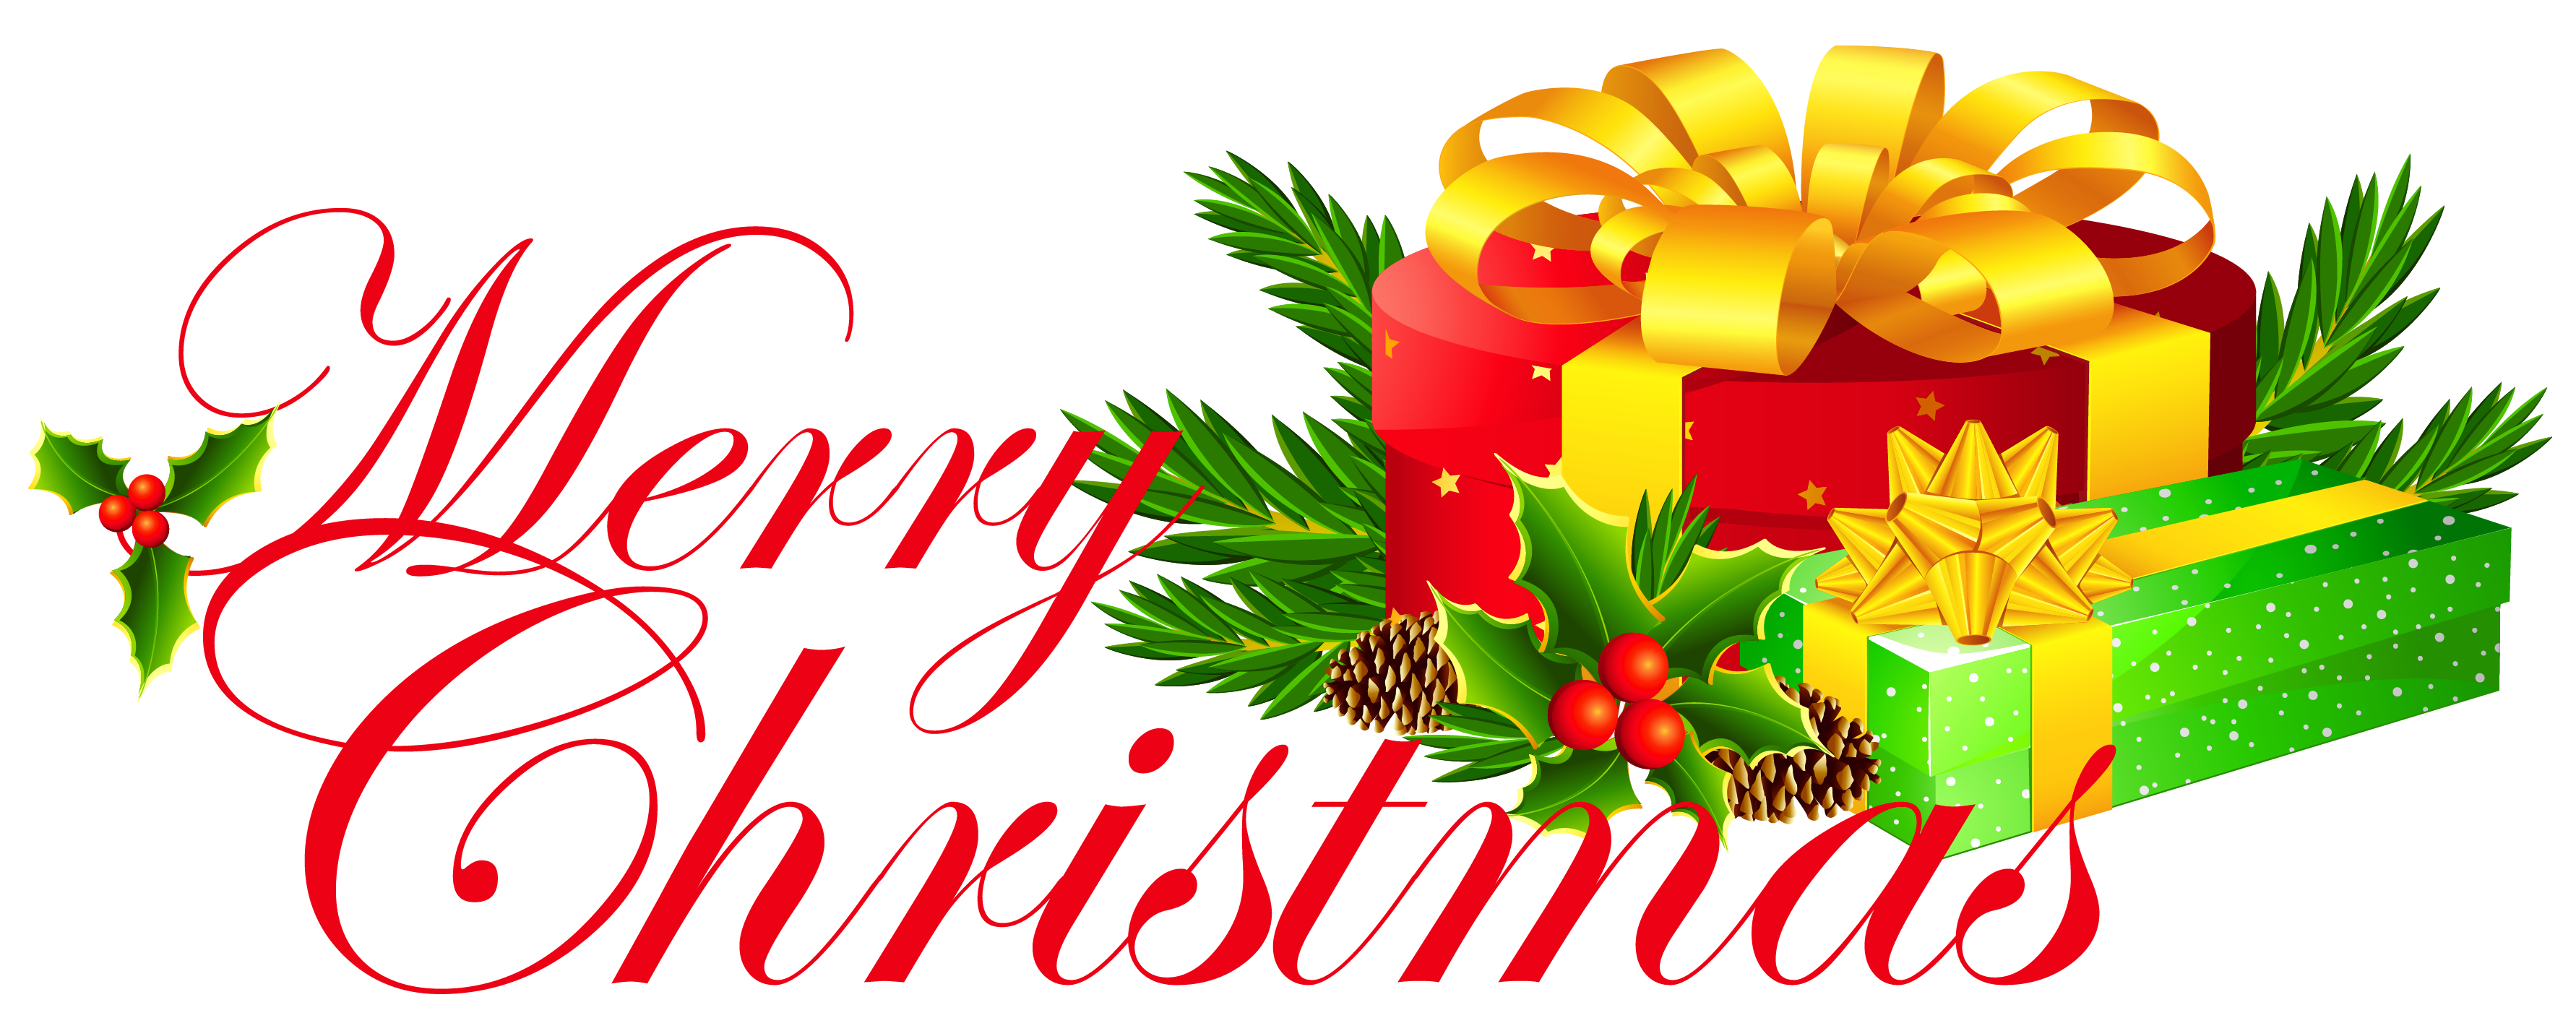 Merry christmas clip art pictures hd new template images image